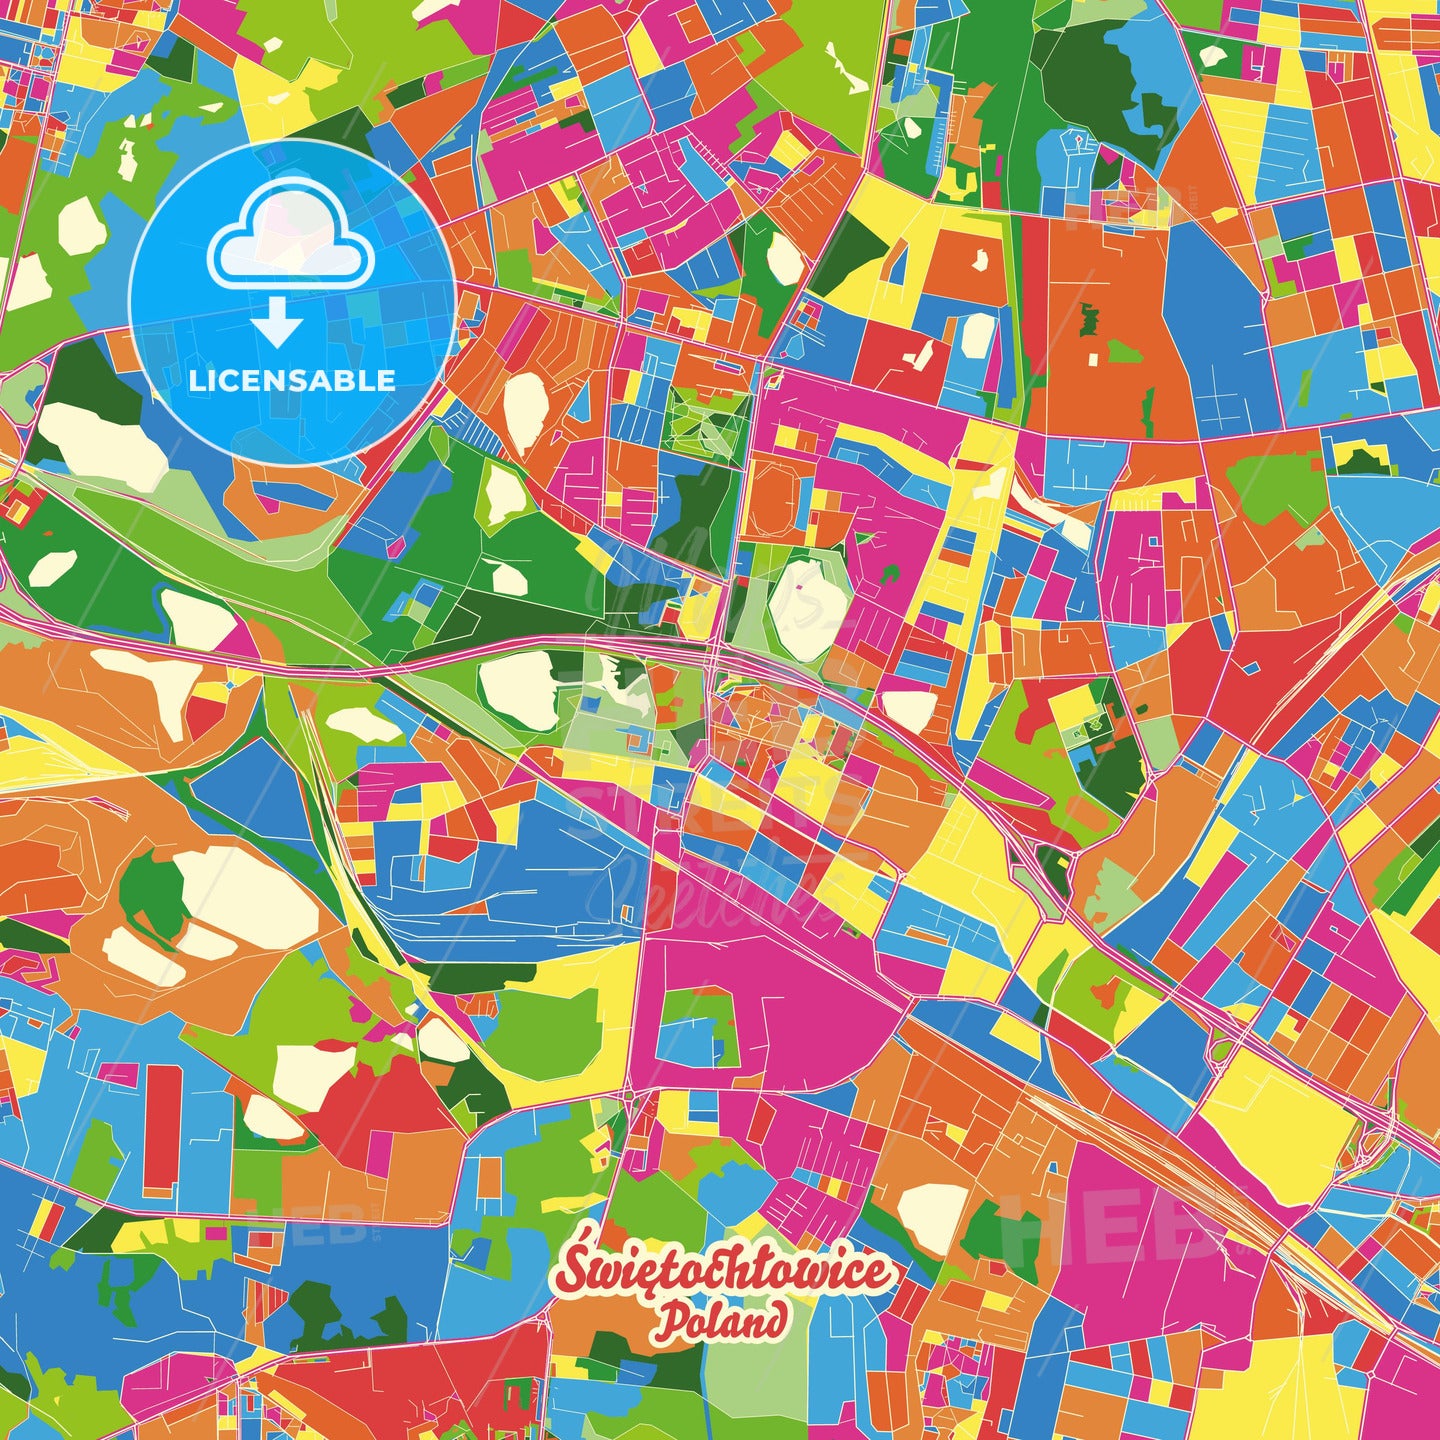 Świętochłowice, Poland Crazy Colorful Street Map Poster Template - HEBSTREITS Sketches